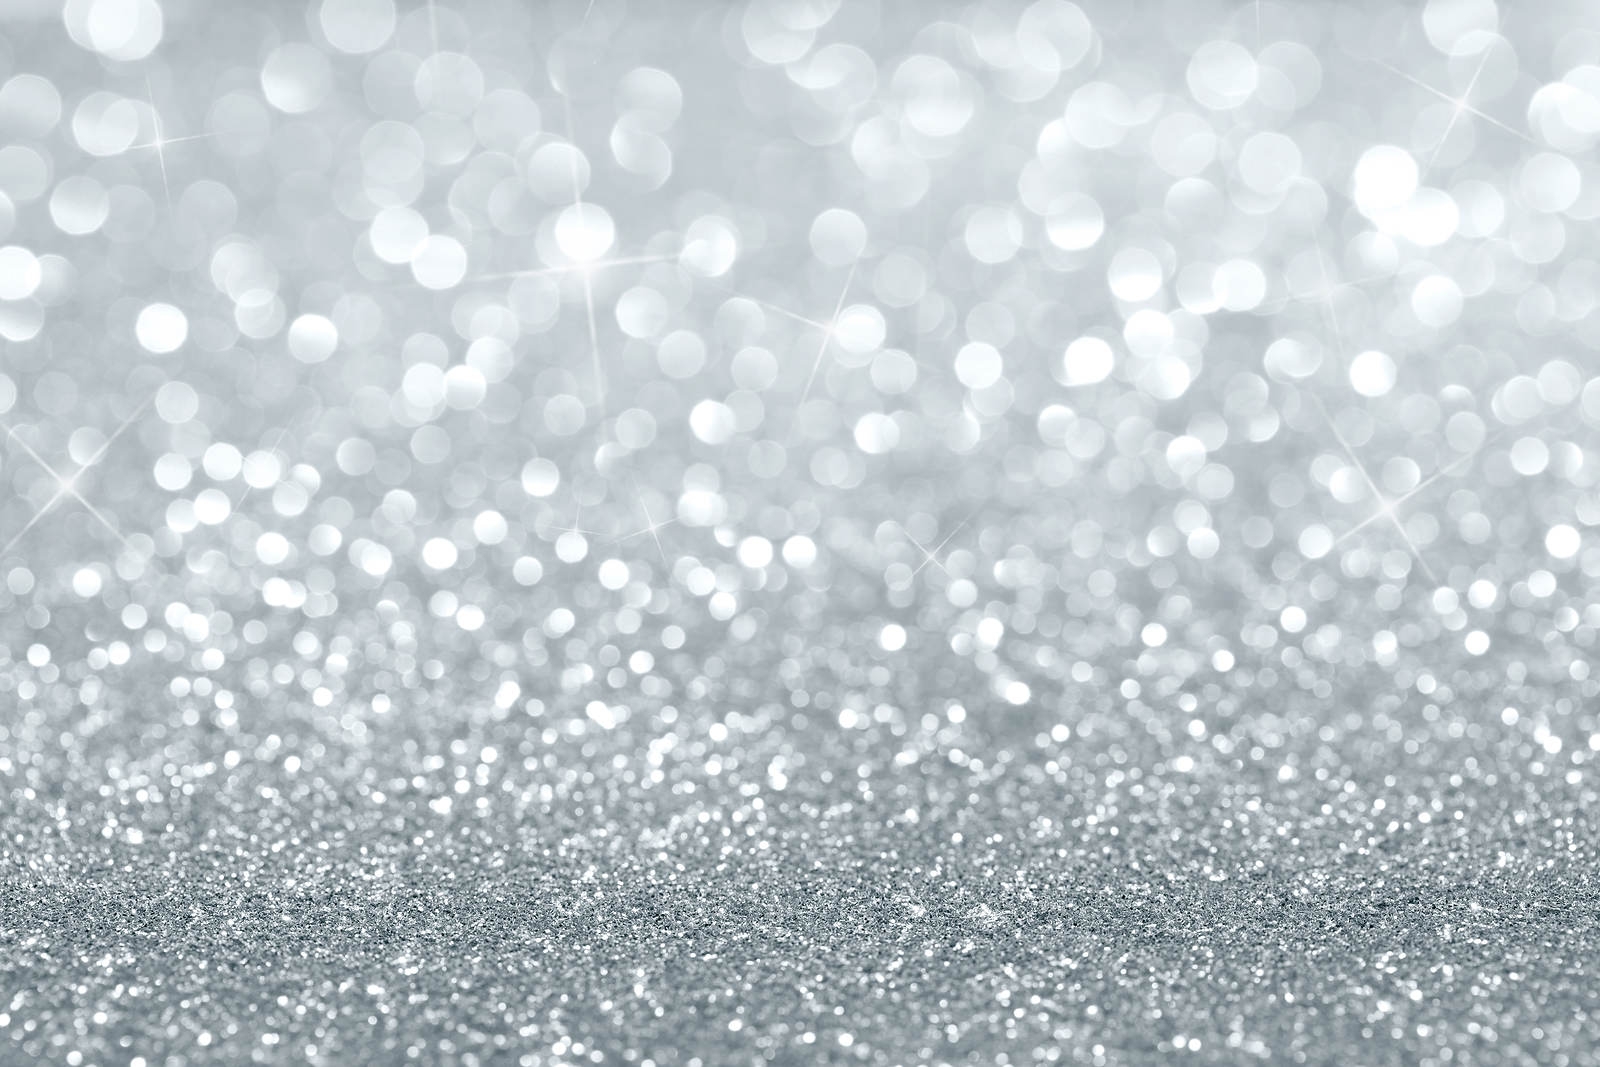 FREE Silver Glitter Background in PSD